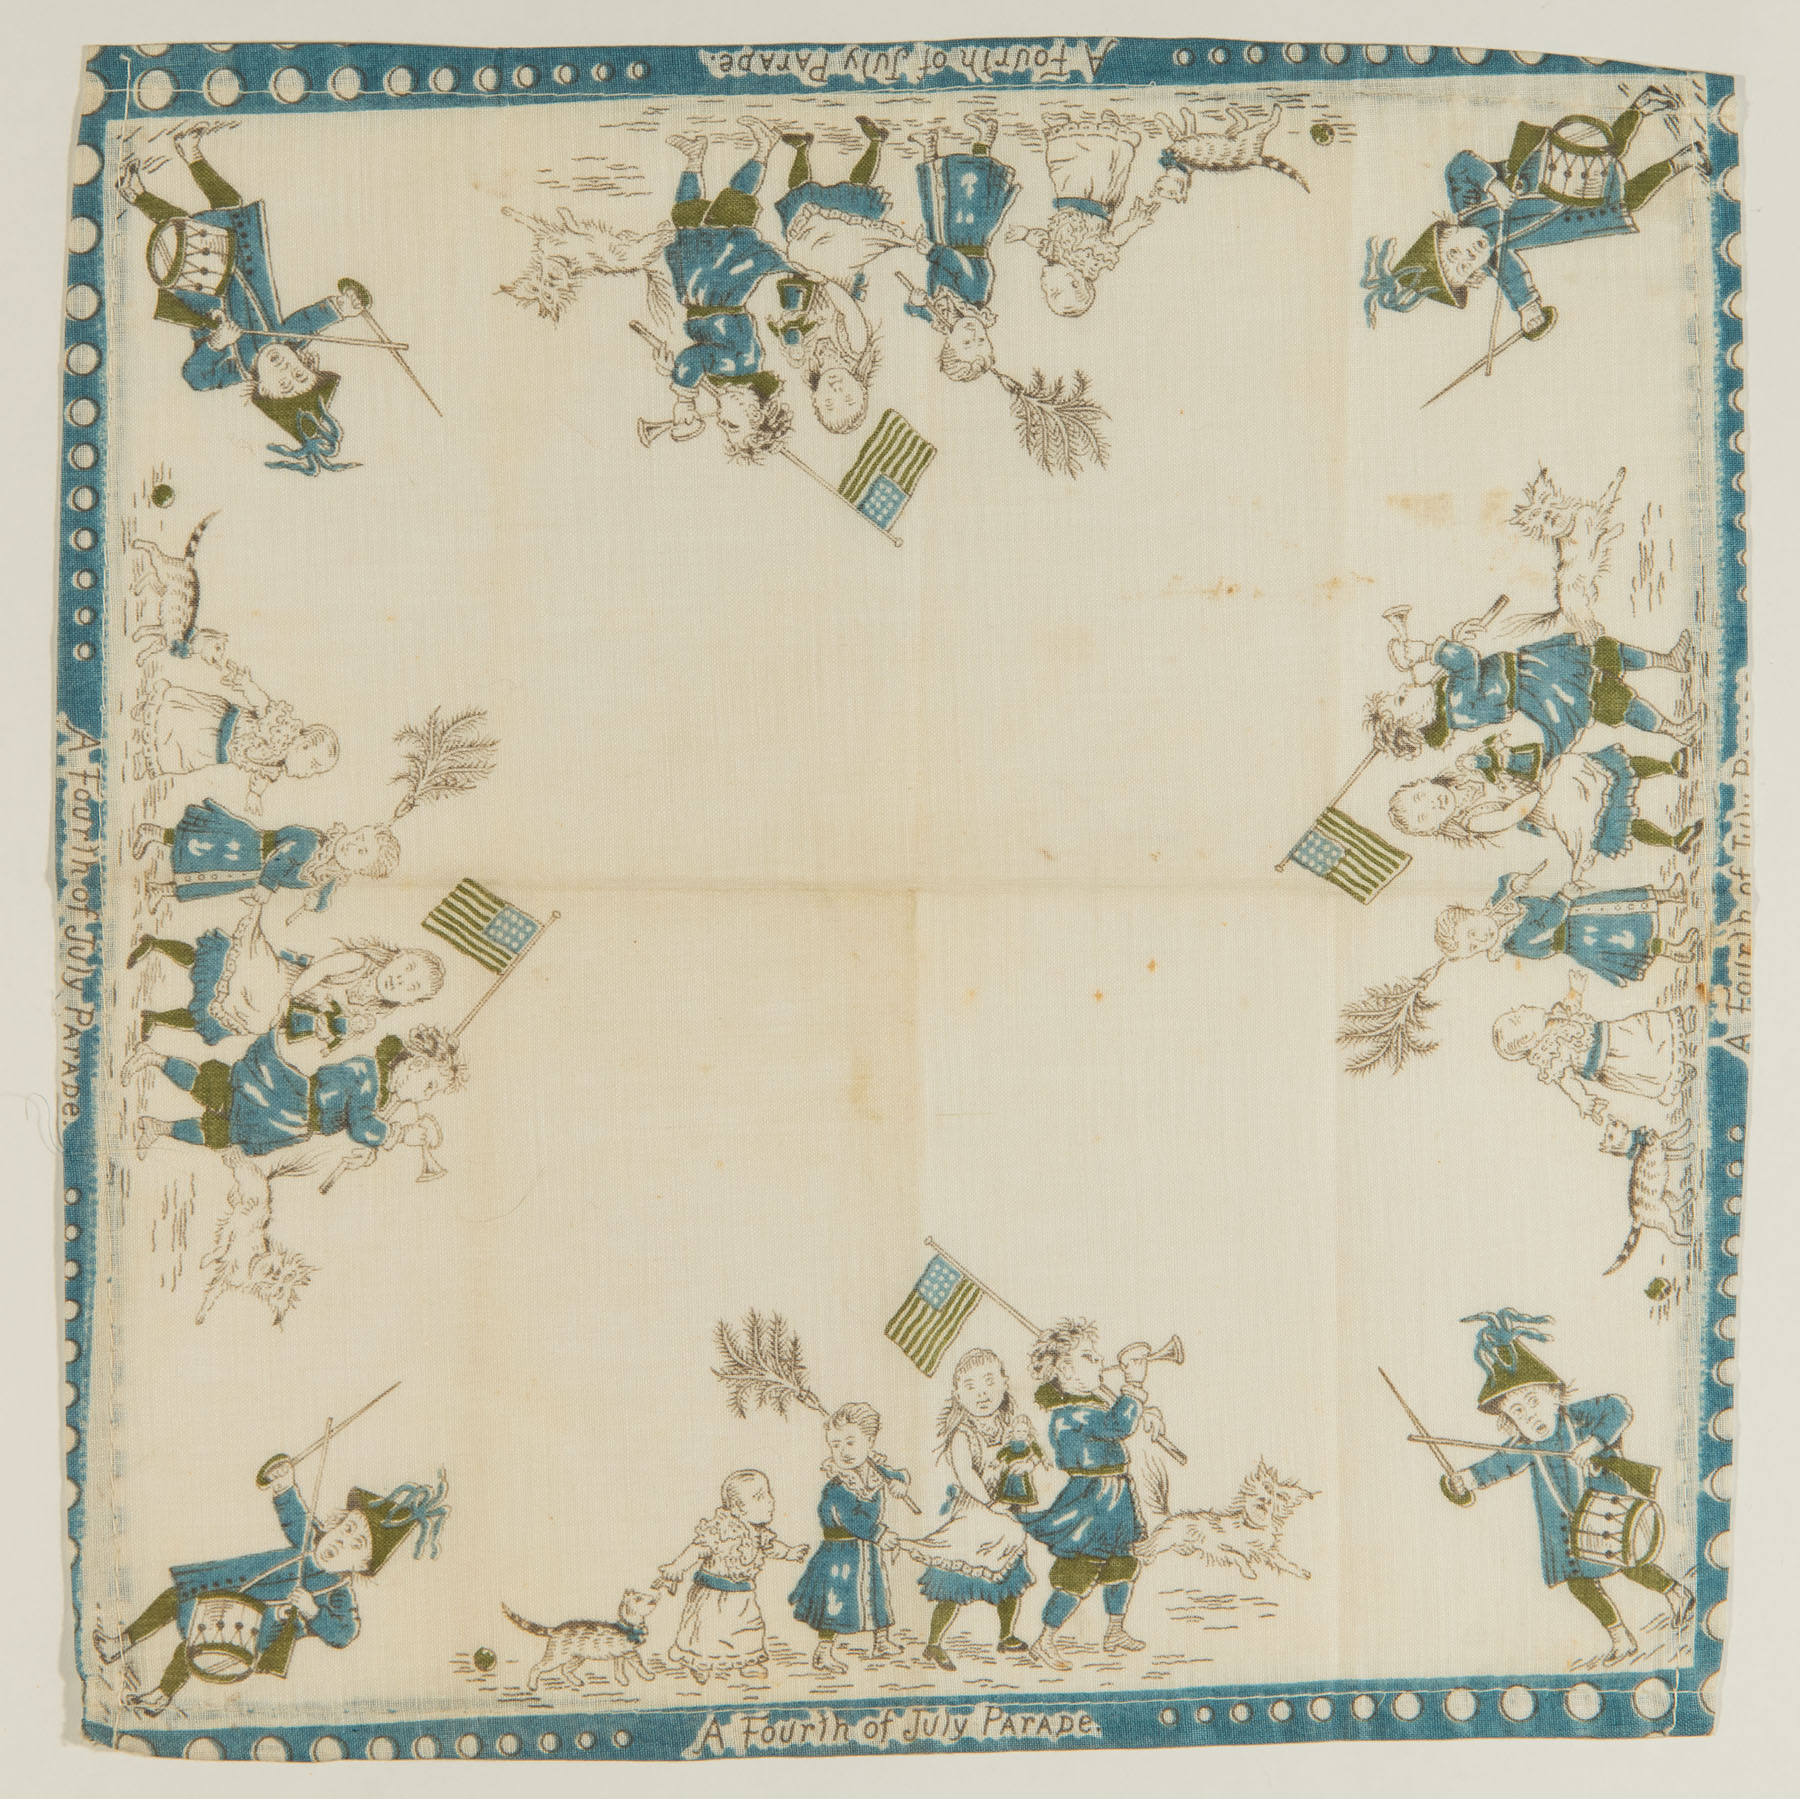 A Fourth of July Parade Child's Handkerchief